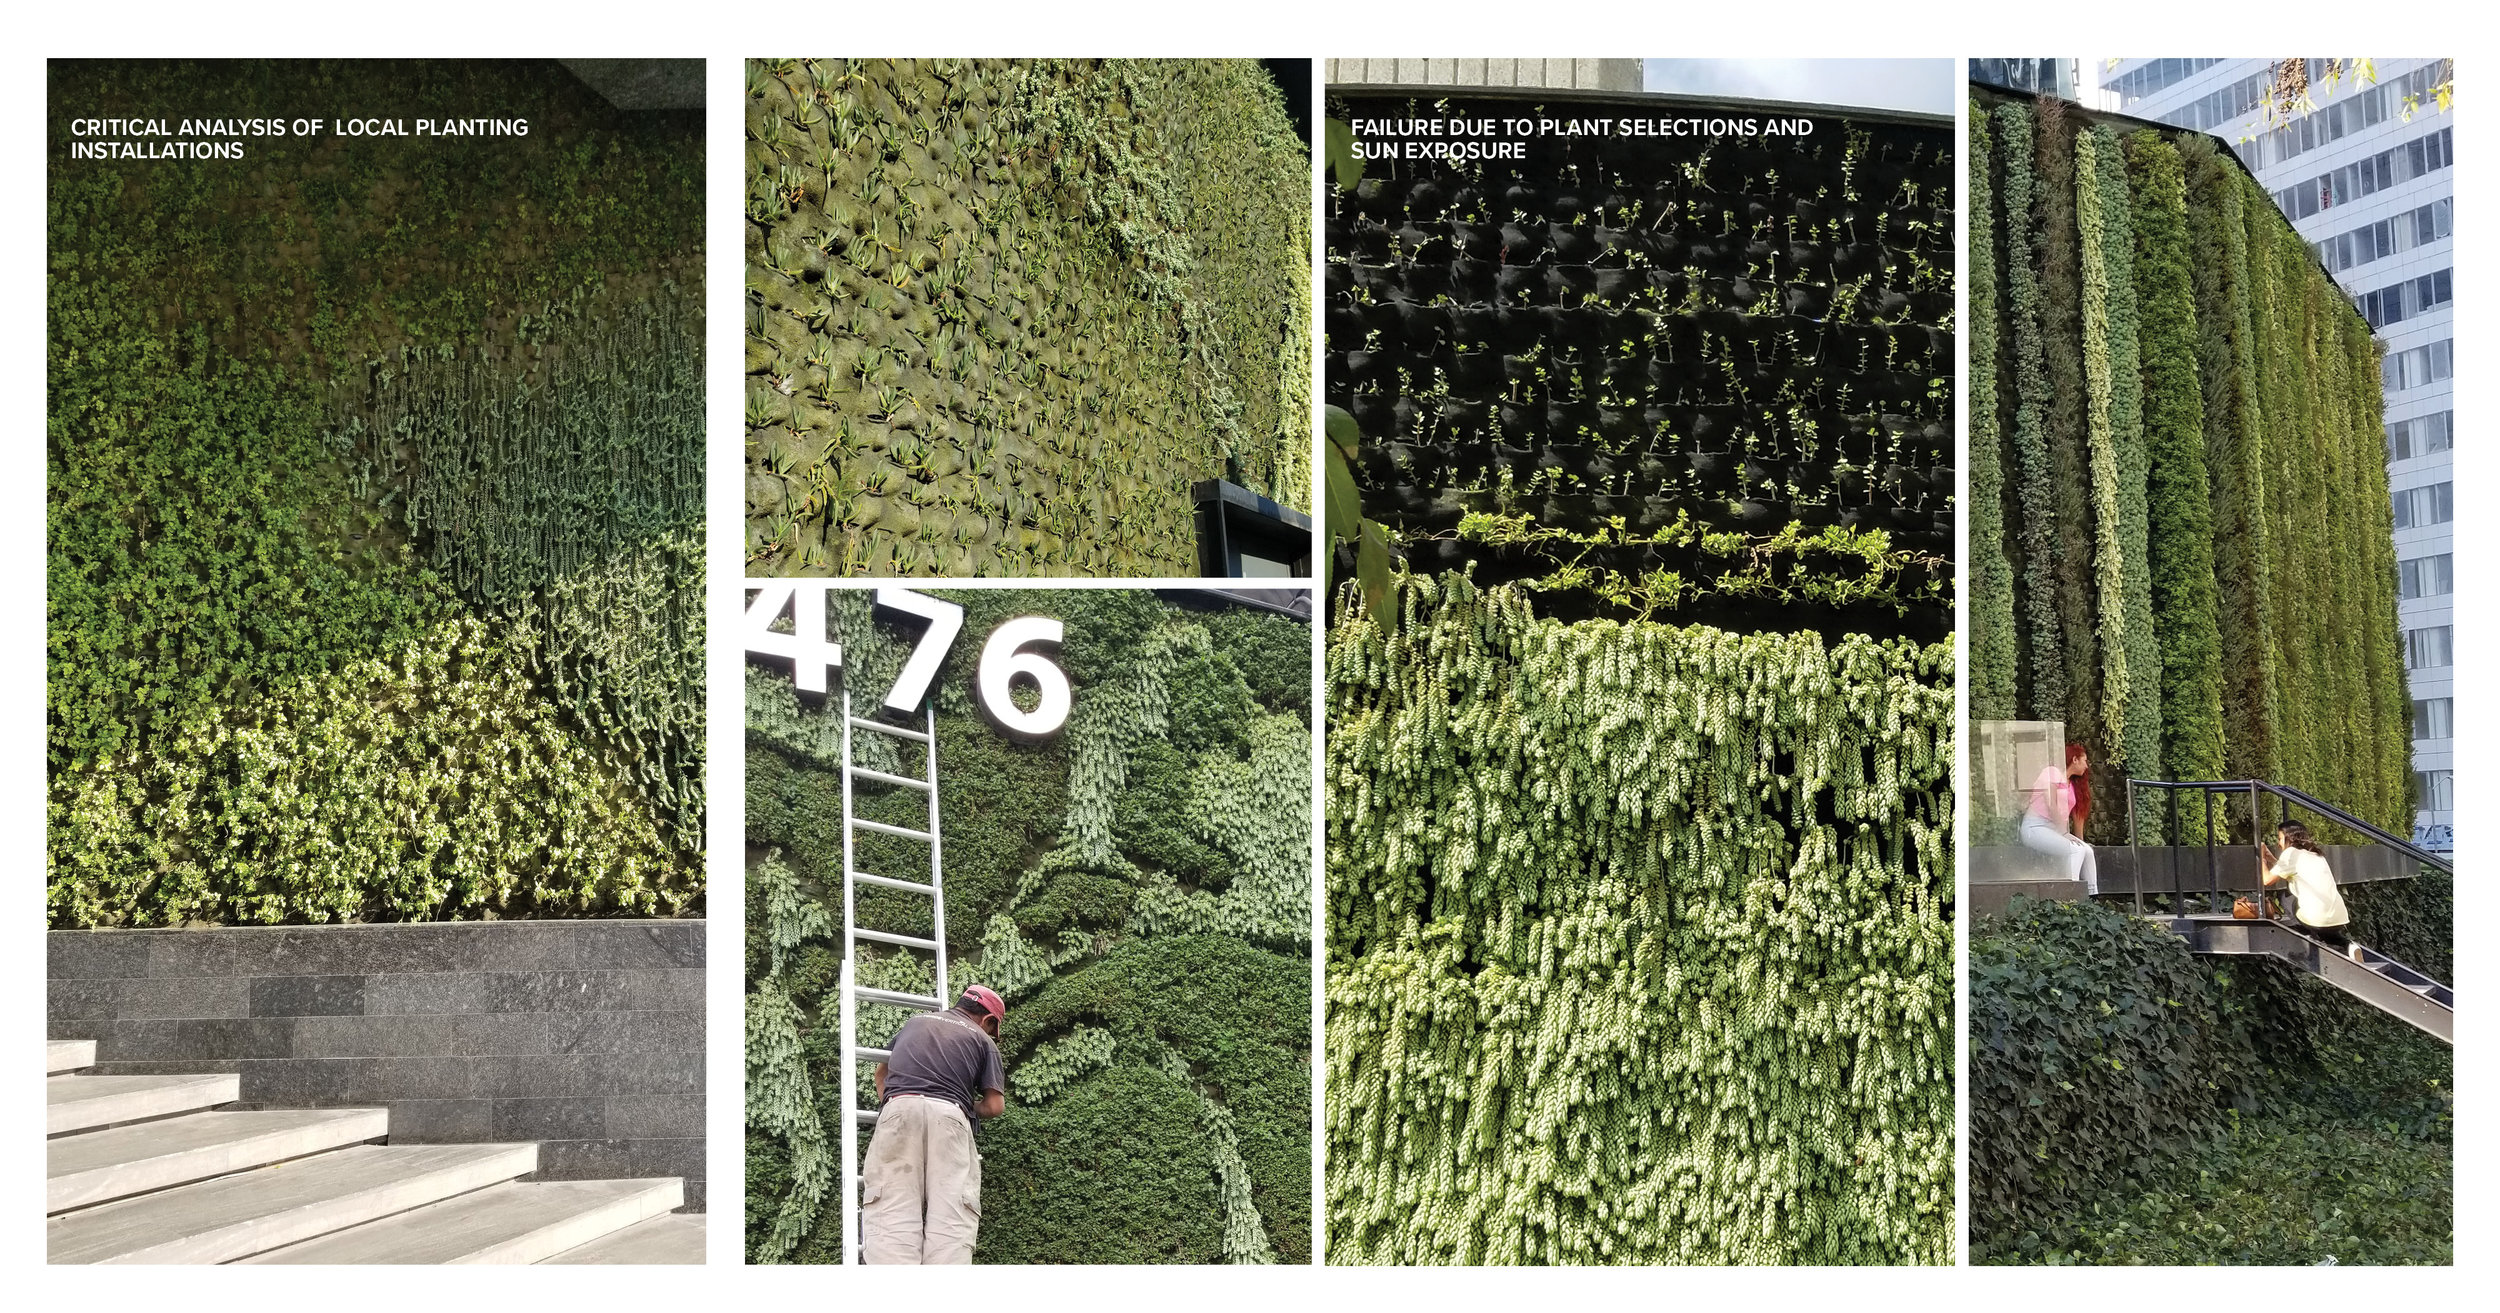  One of the initial large components of the design project that led to the production of the resource book, was the inclusion and design of significant green walls on a curving façade. The design team conducted an extensive survey of existing green w